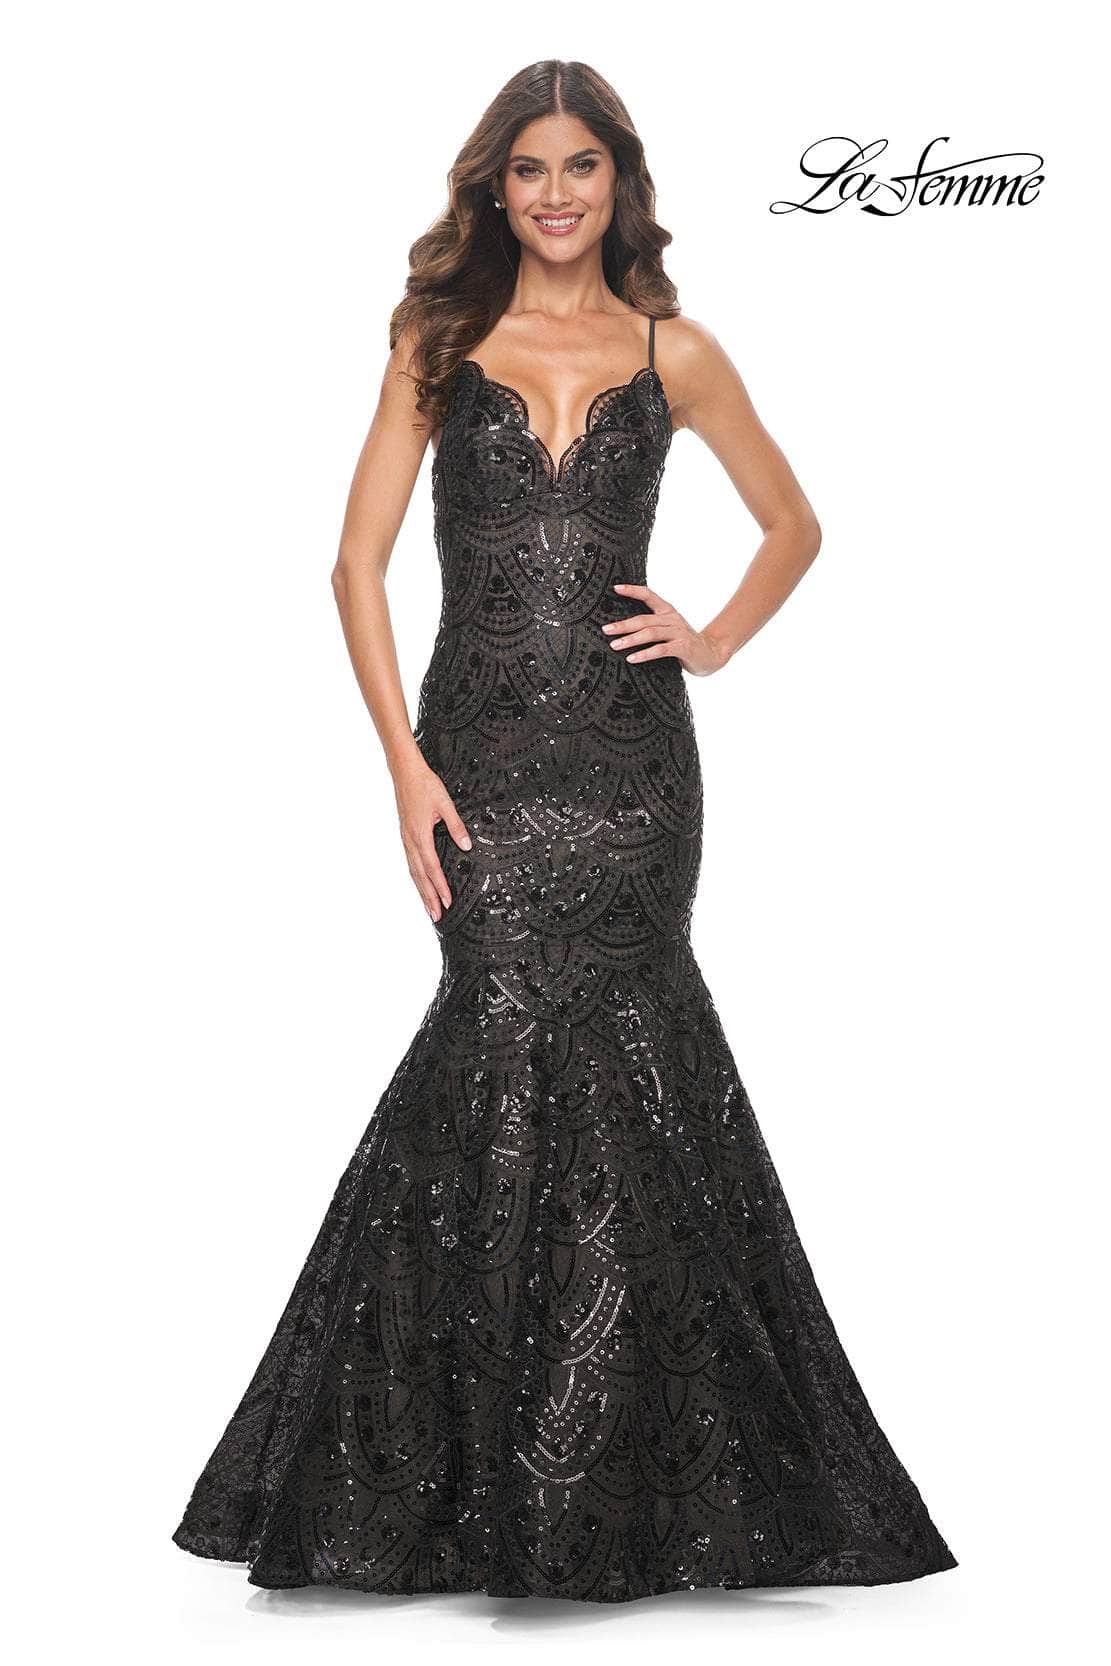 La Femme 32118 - Sequin Sleeveless Prom Gown
